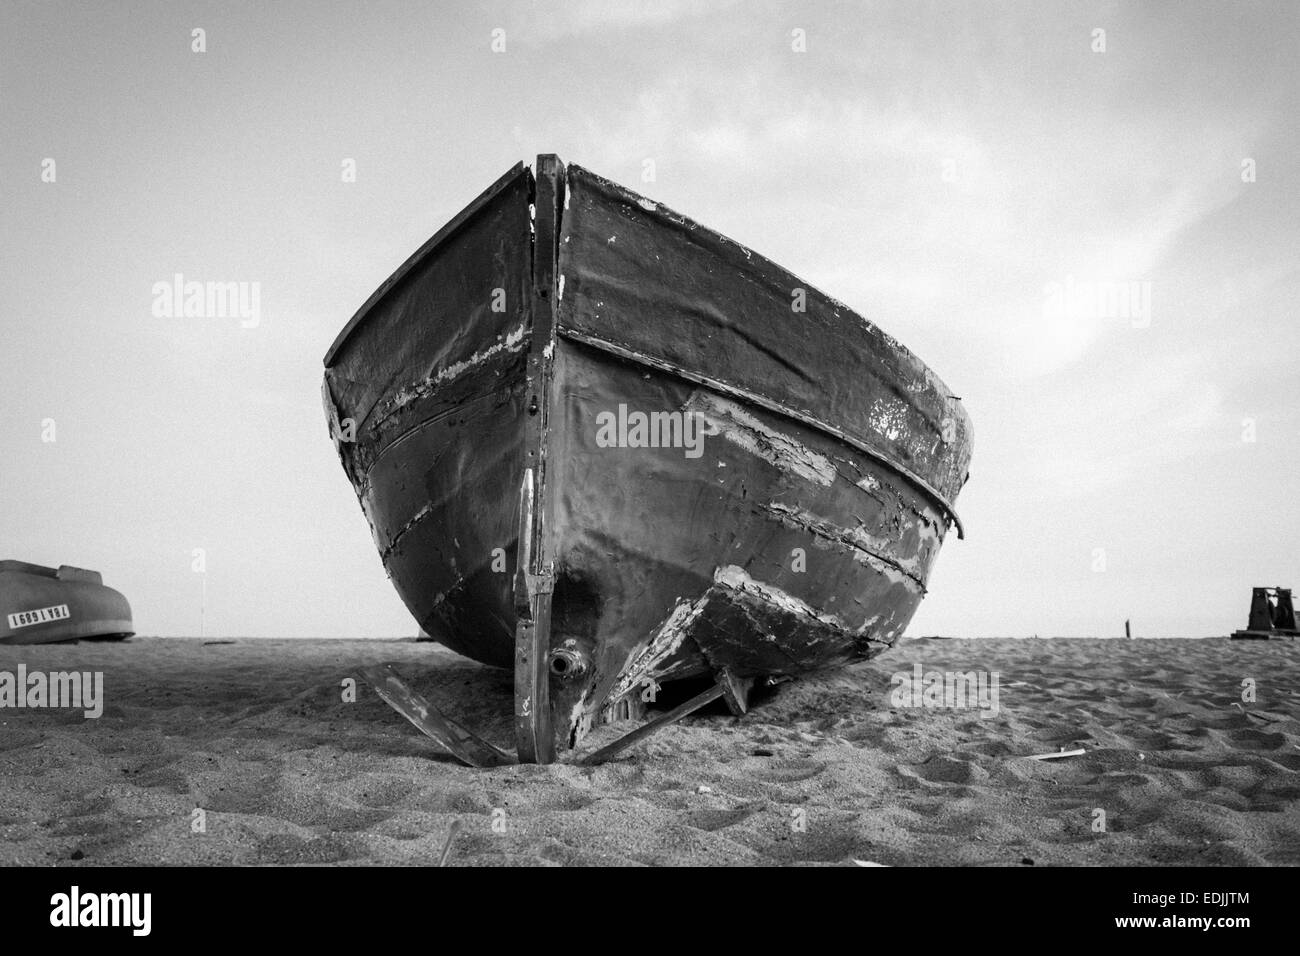 Boat sea travel Black and White Stock Photos & Images - Page 3 - Alamy